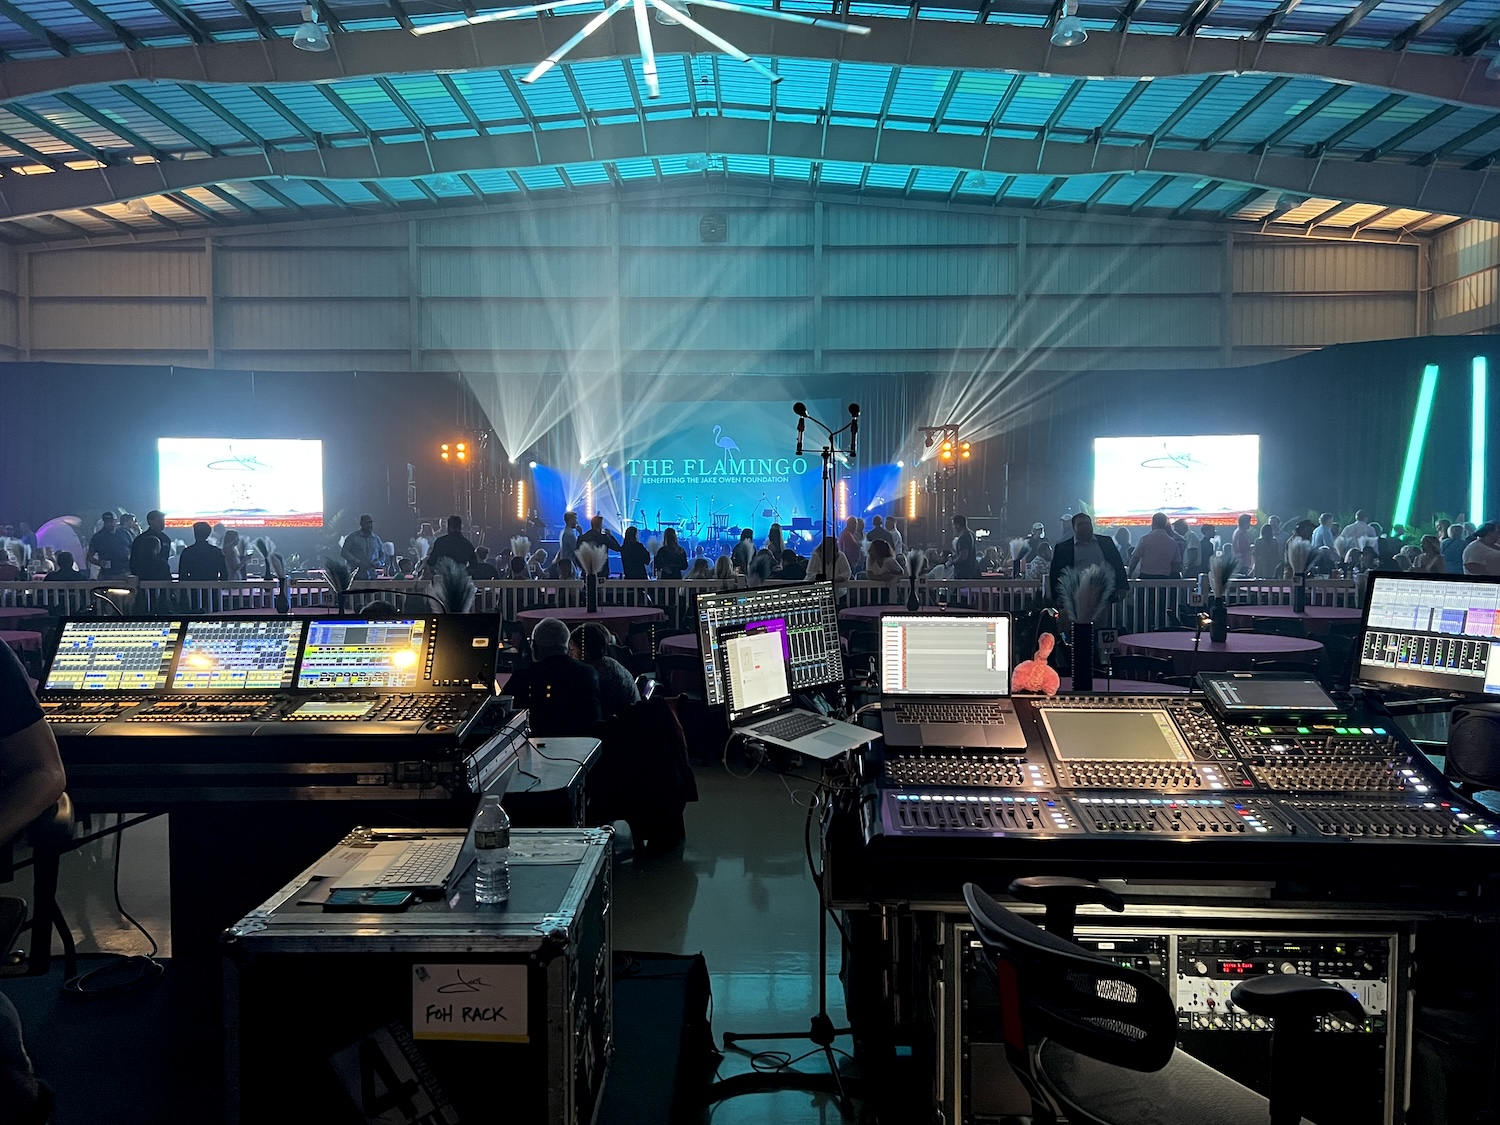 A technical production setup with multiple control boards in the foreground, overlooking an event space with the stage lit up and the text 'THE FLAMINGO' prominently displayed.